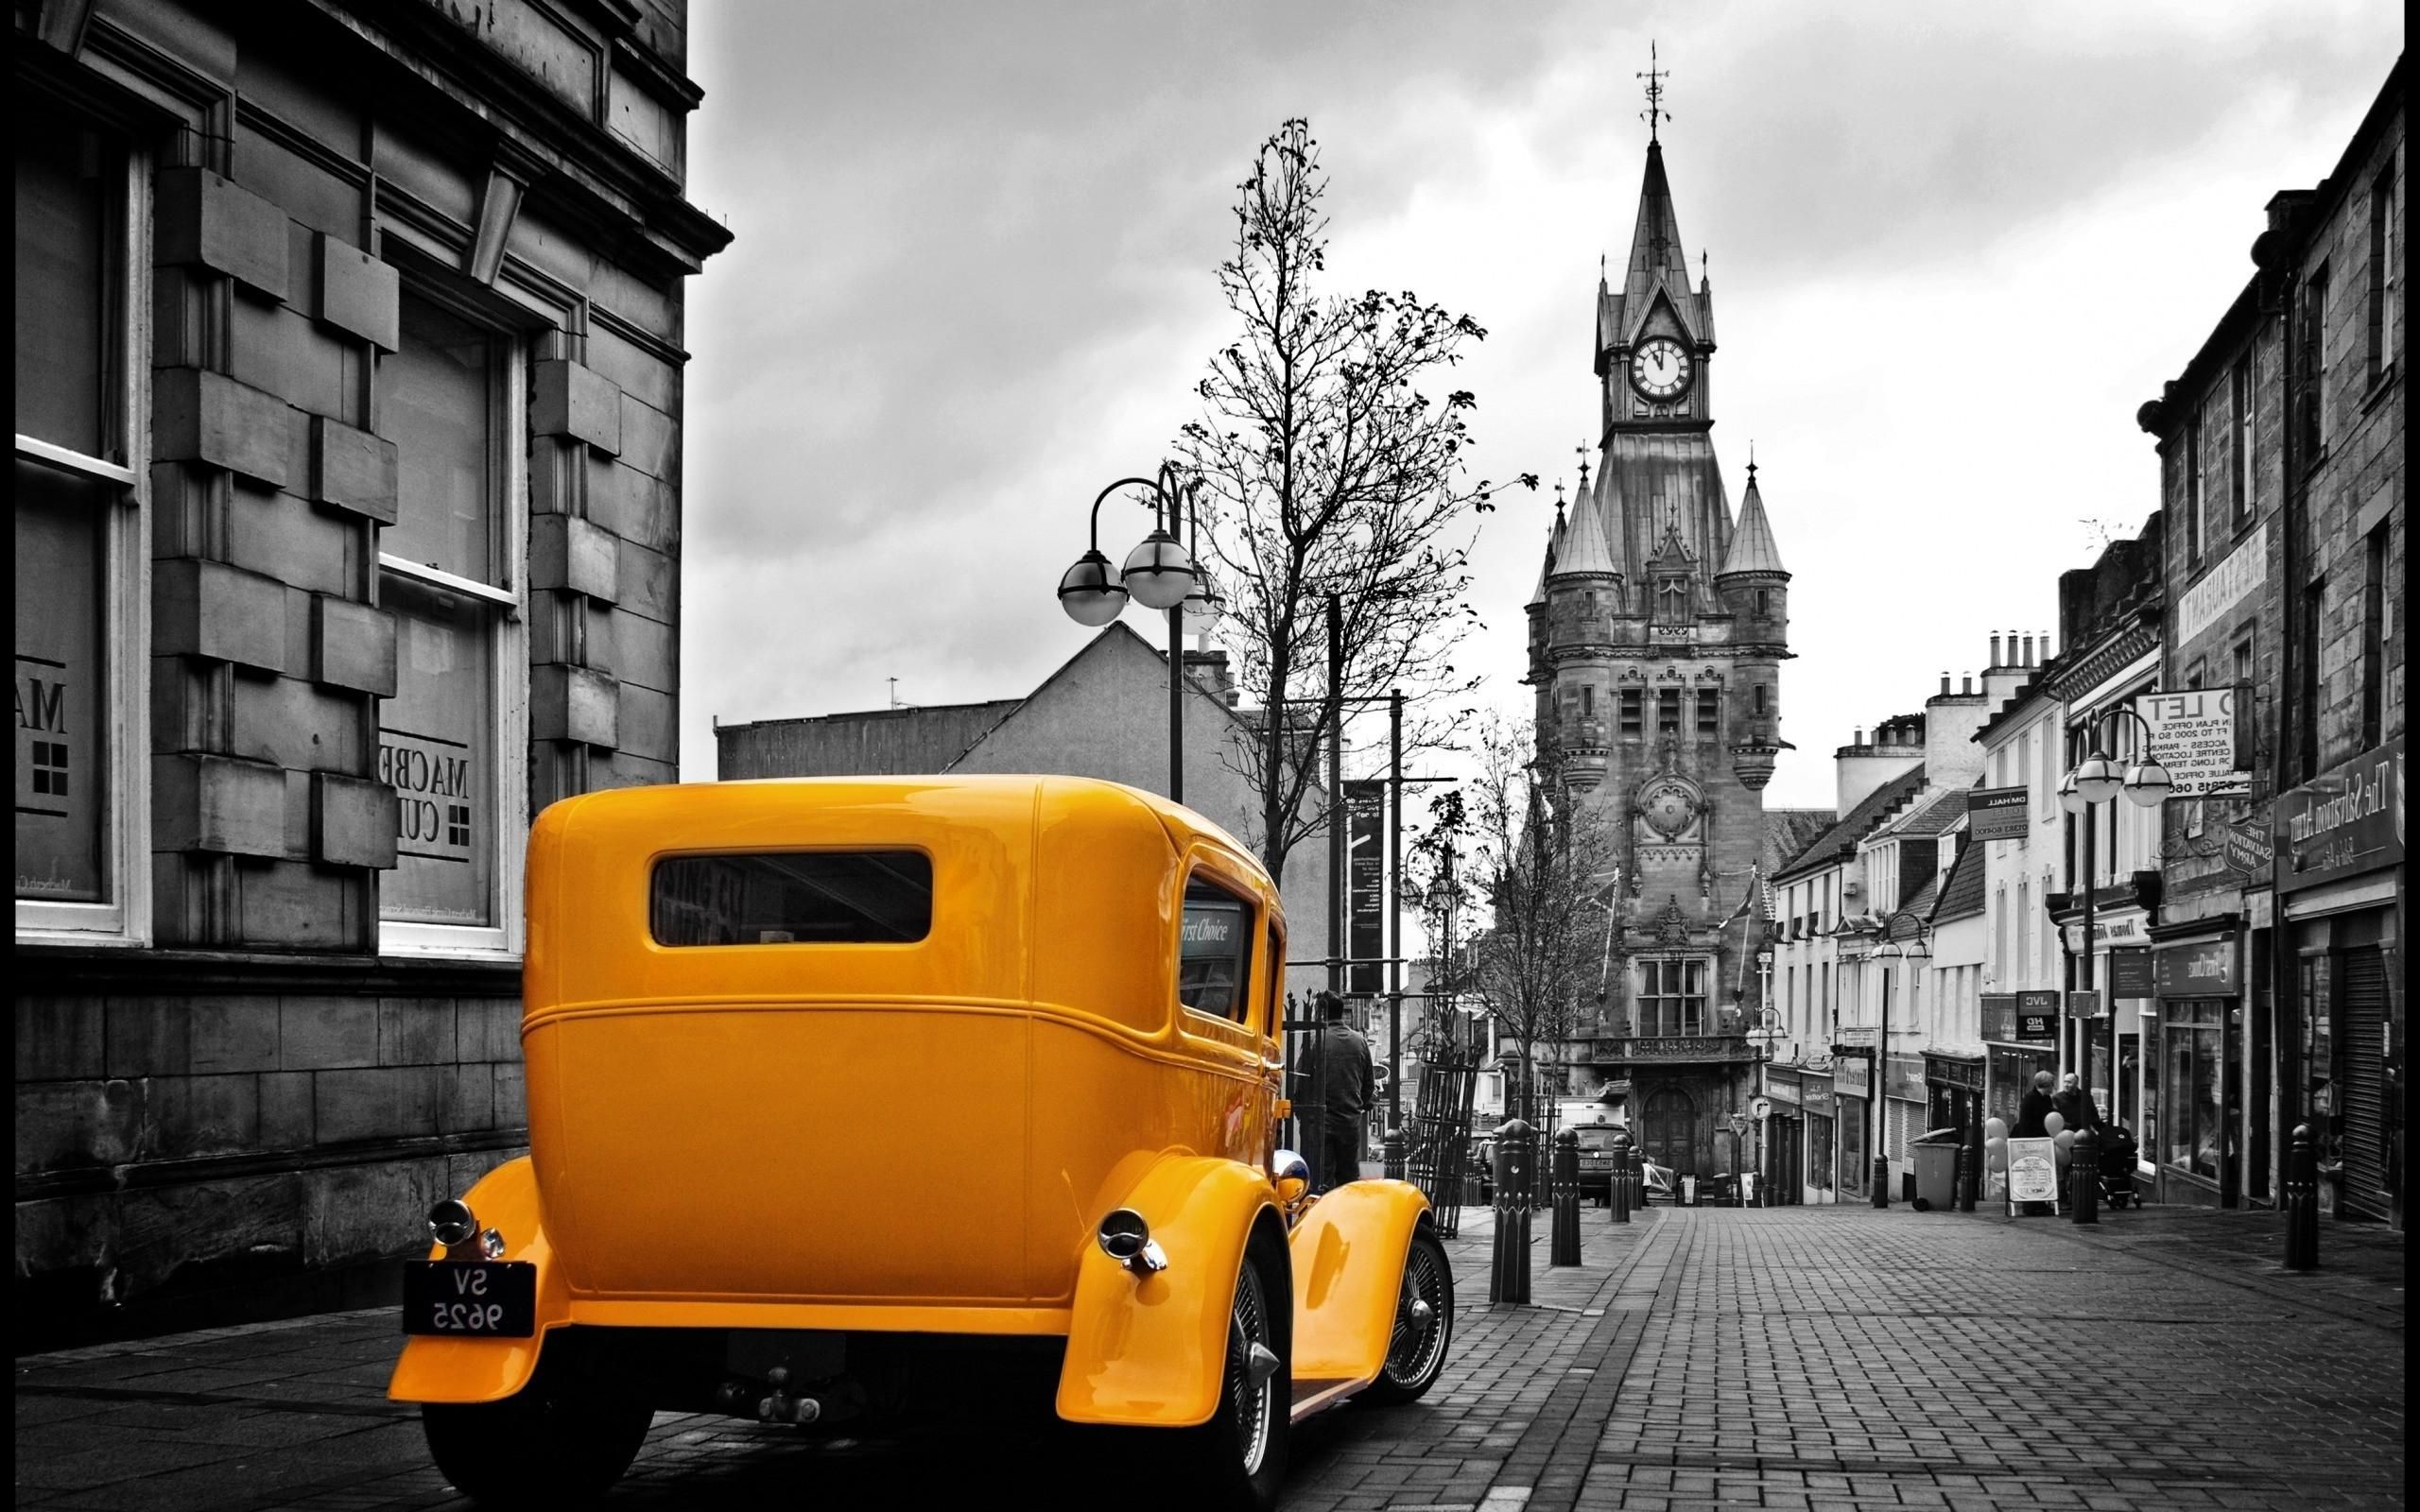 Download HD wallpaper of Vintage Yellow Car In A Gray City. Free download High Quality and Widescreen Resolutions Desk. Yellow car, City wallpaper, Classicliving